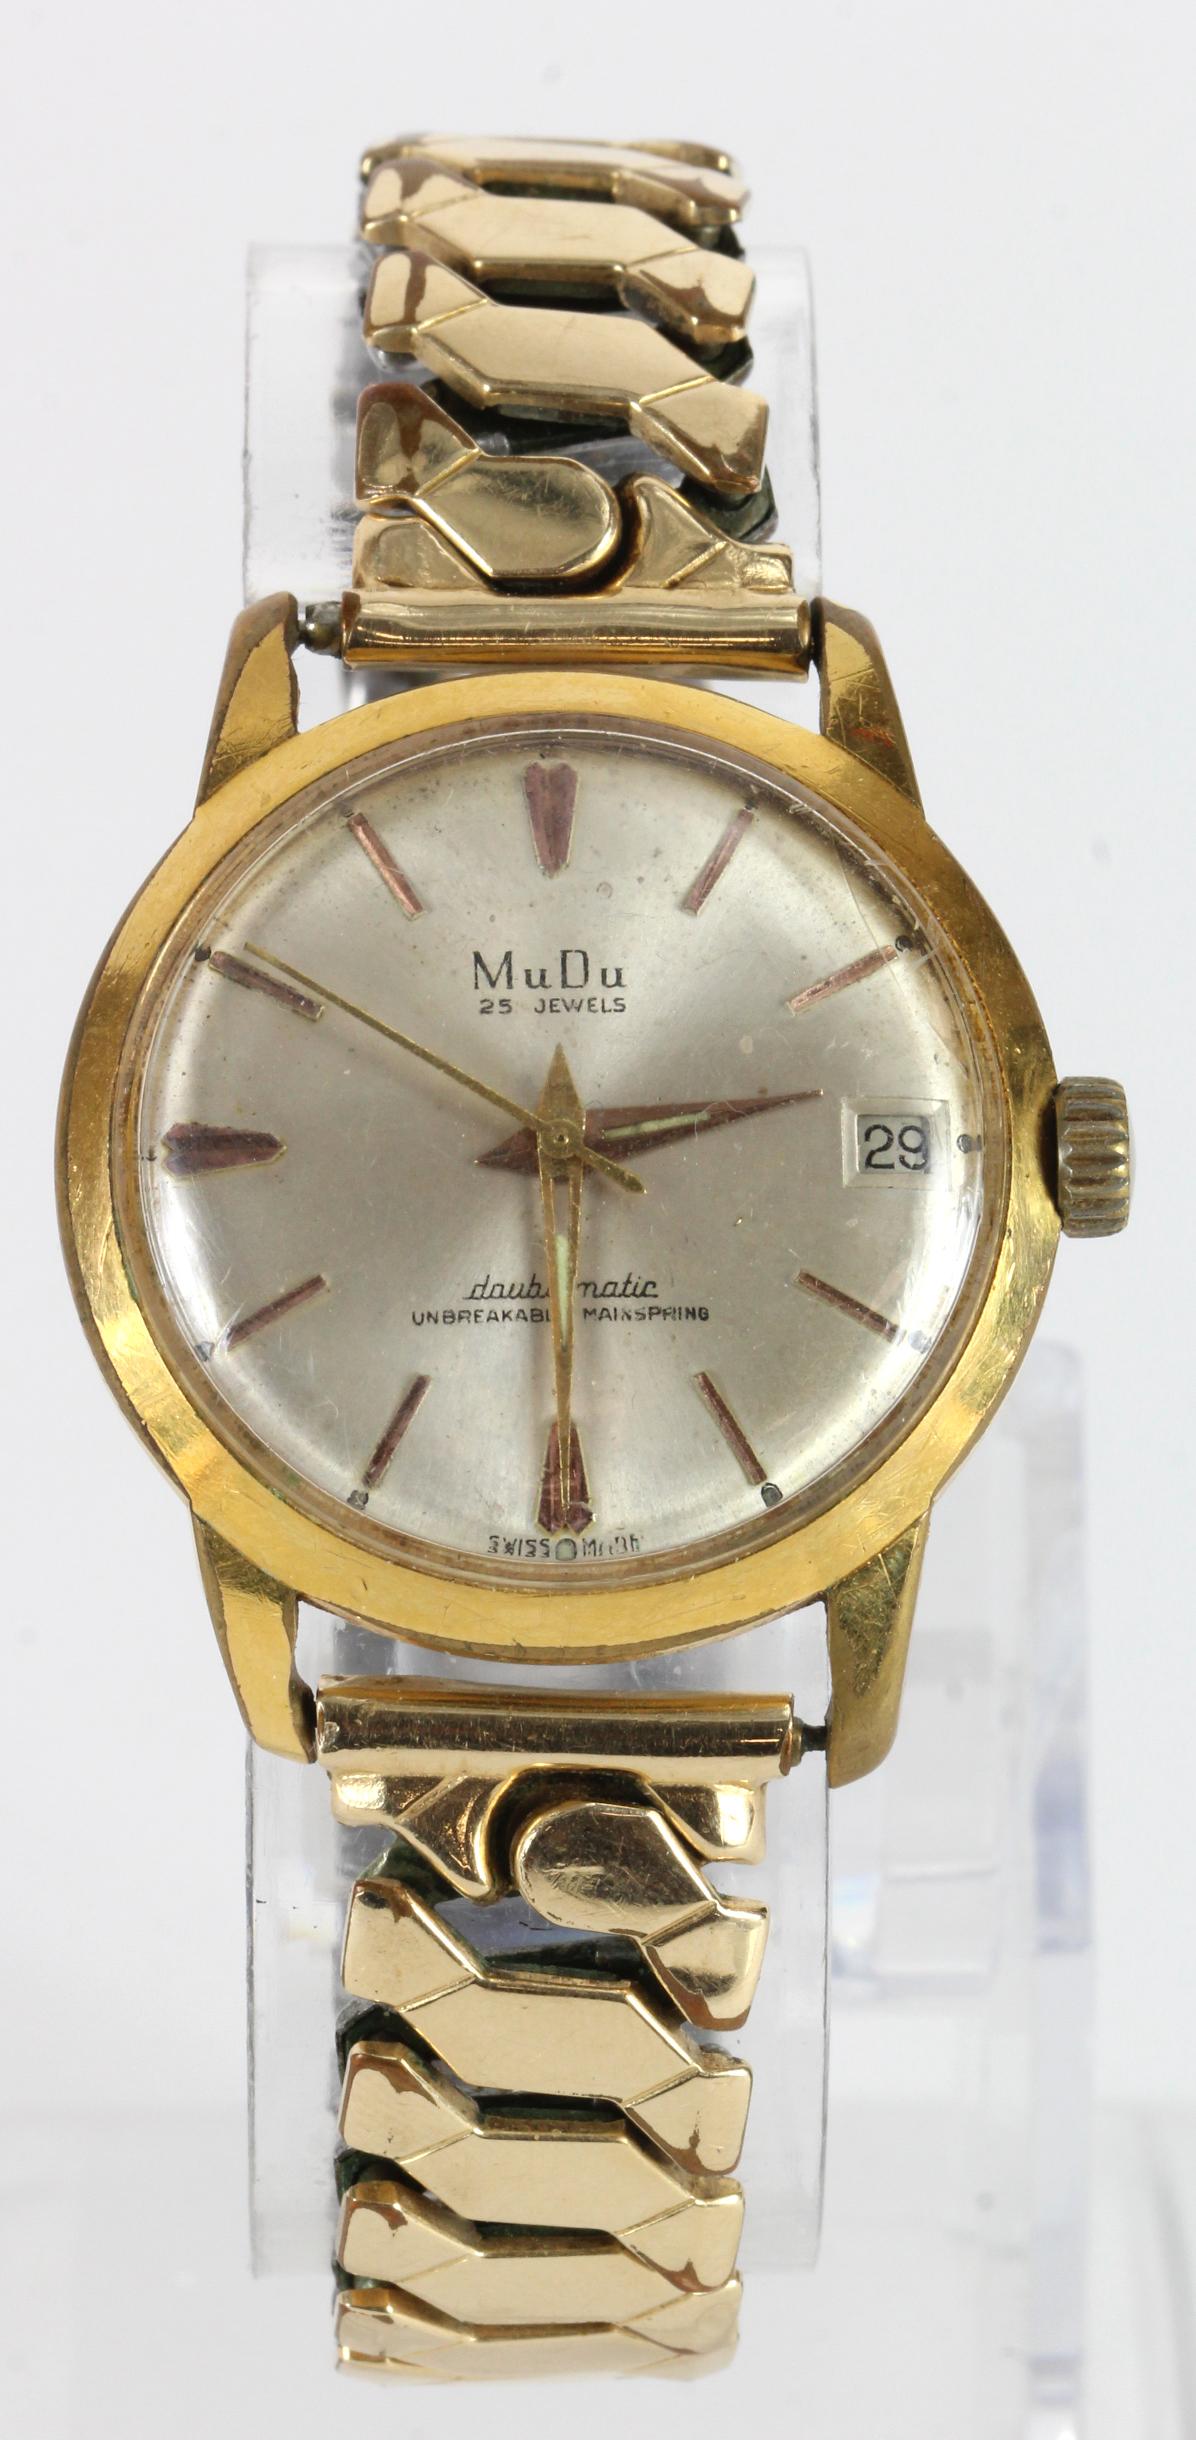 Gents MuDu "Doublematic" wristwatch, working when catalogued